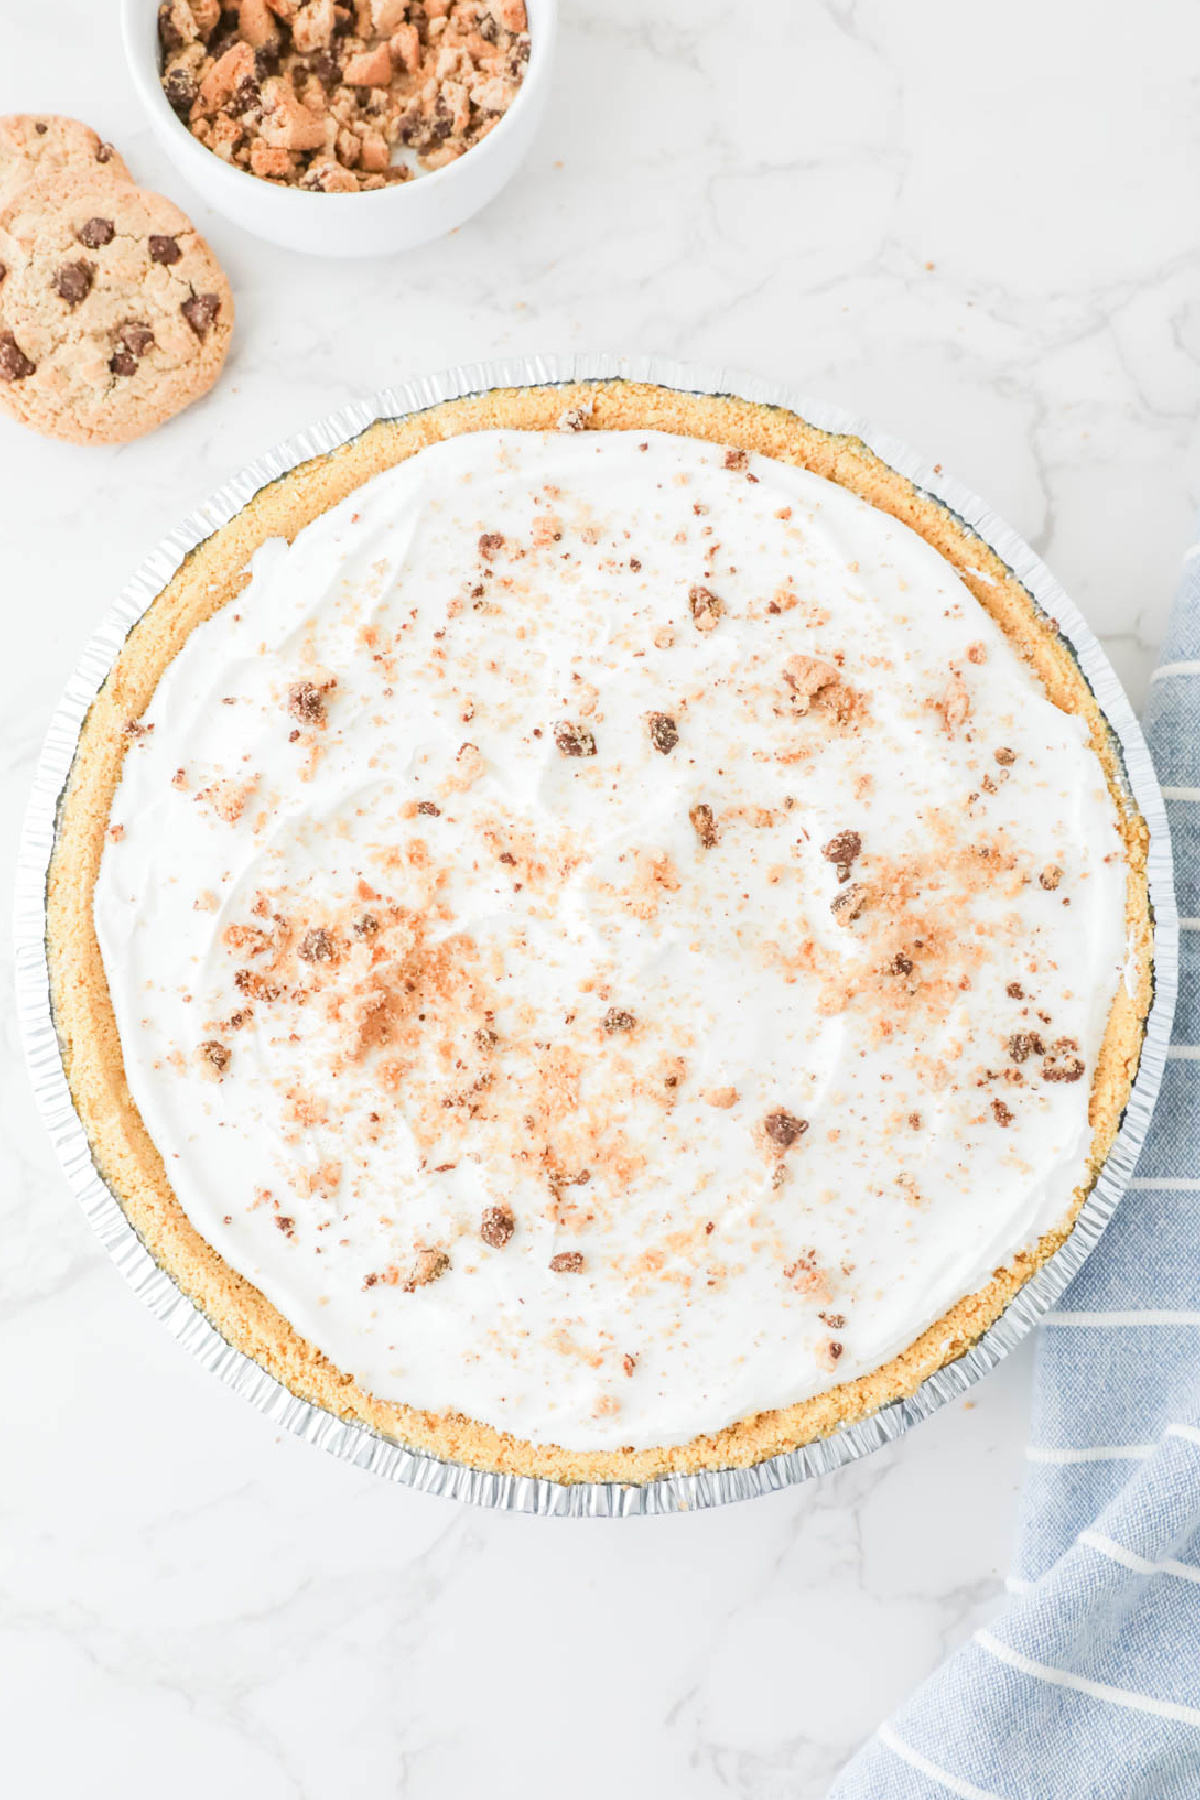 A freshly made cookie cream pie on a marble countertop, garnished with cookie crumbs.